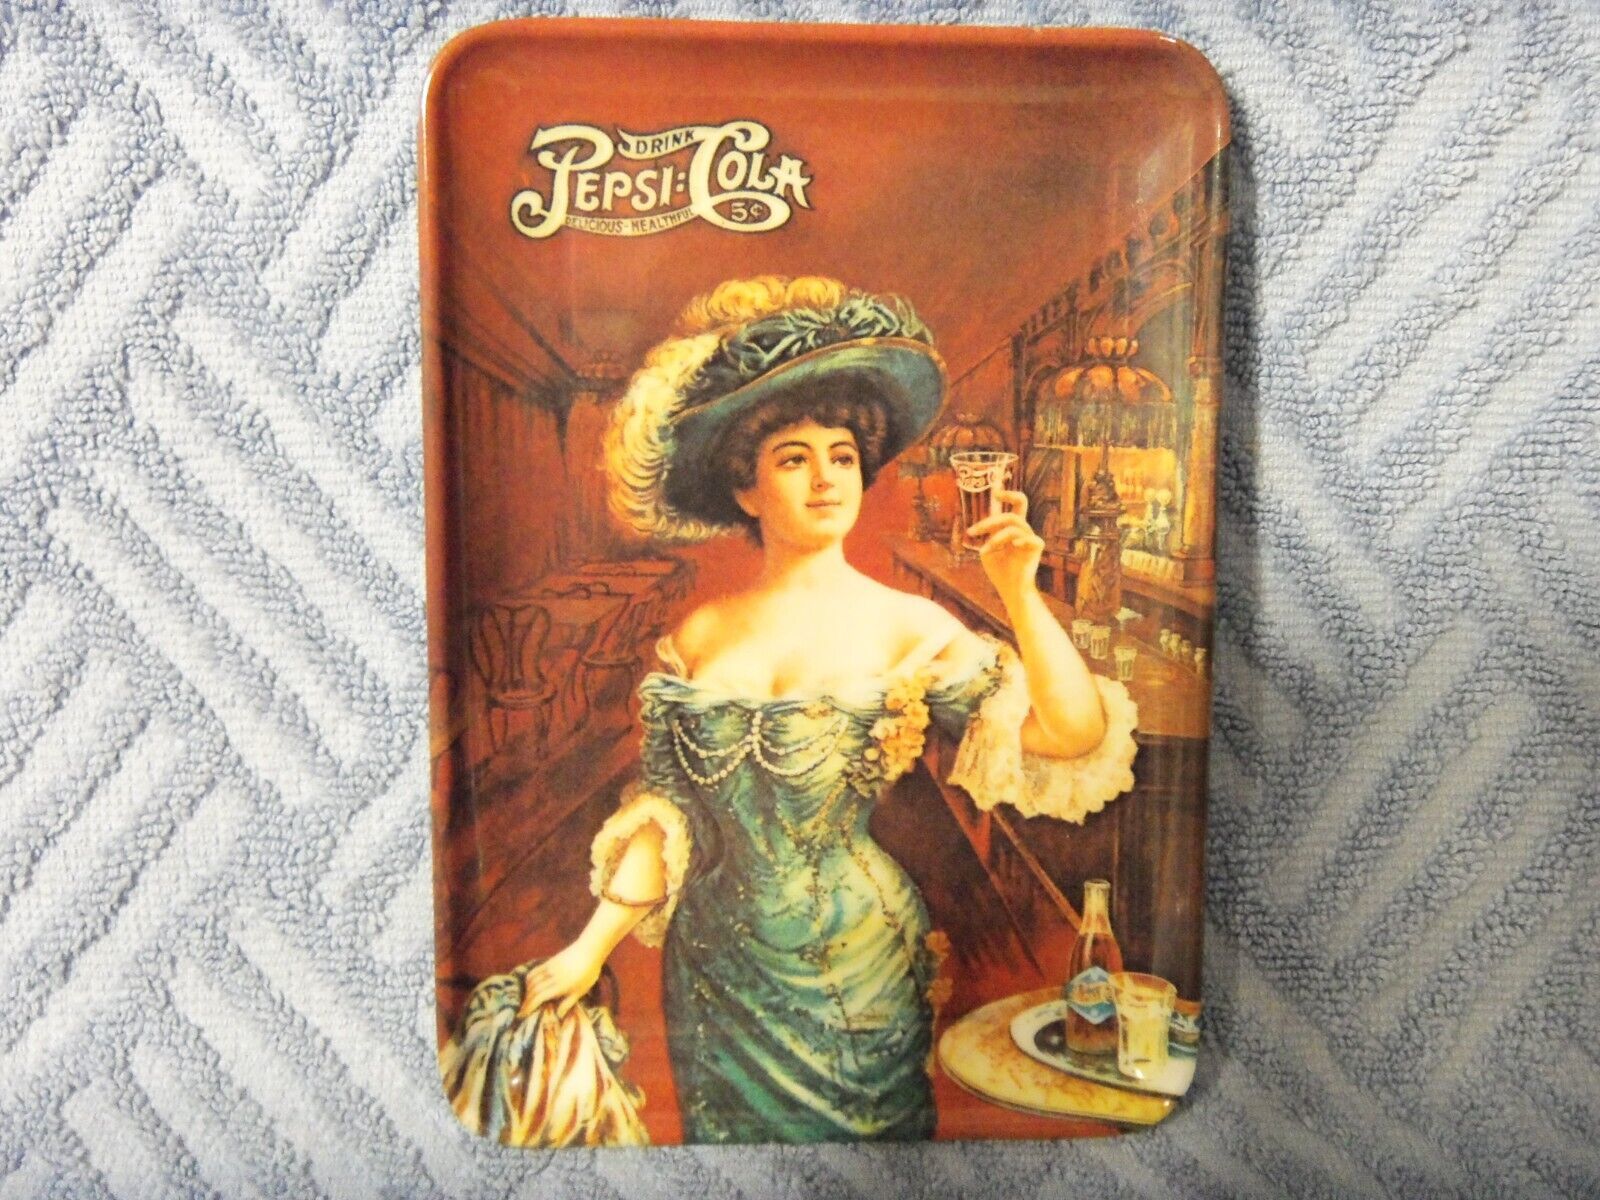 VINTAGE PEPSI COLA PLASTIC TRAY  MADE IN ITALY  5.75" X 4" - $9.85